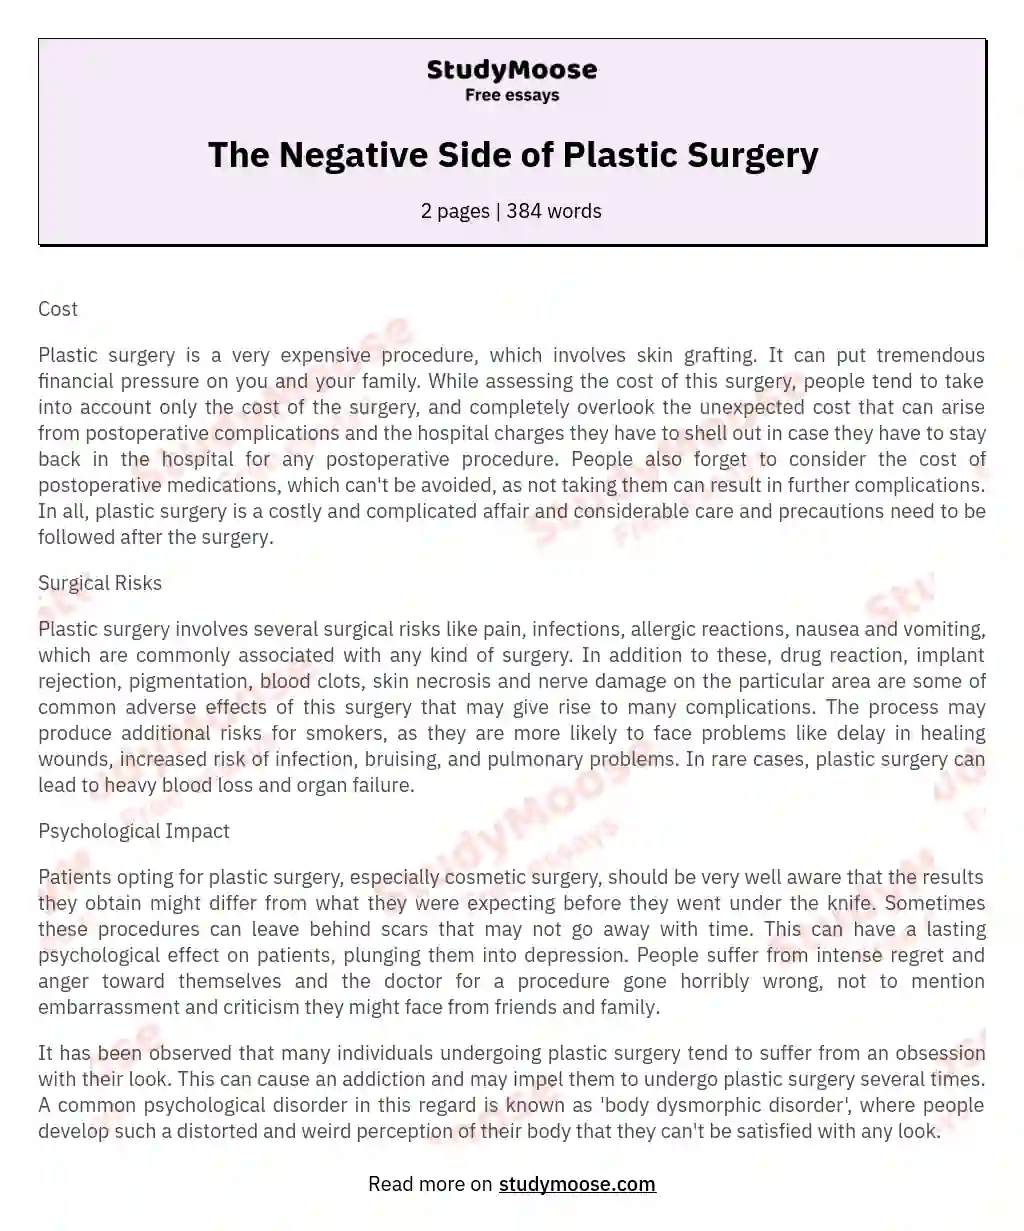 The Negative Side of Plastic Surgery